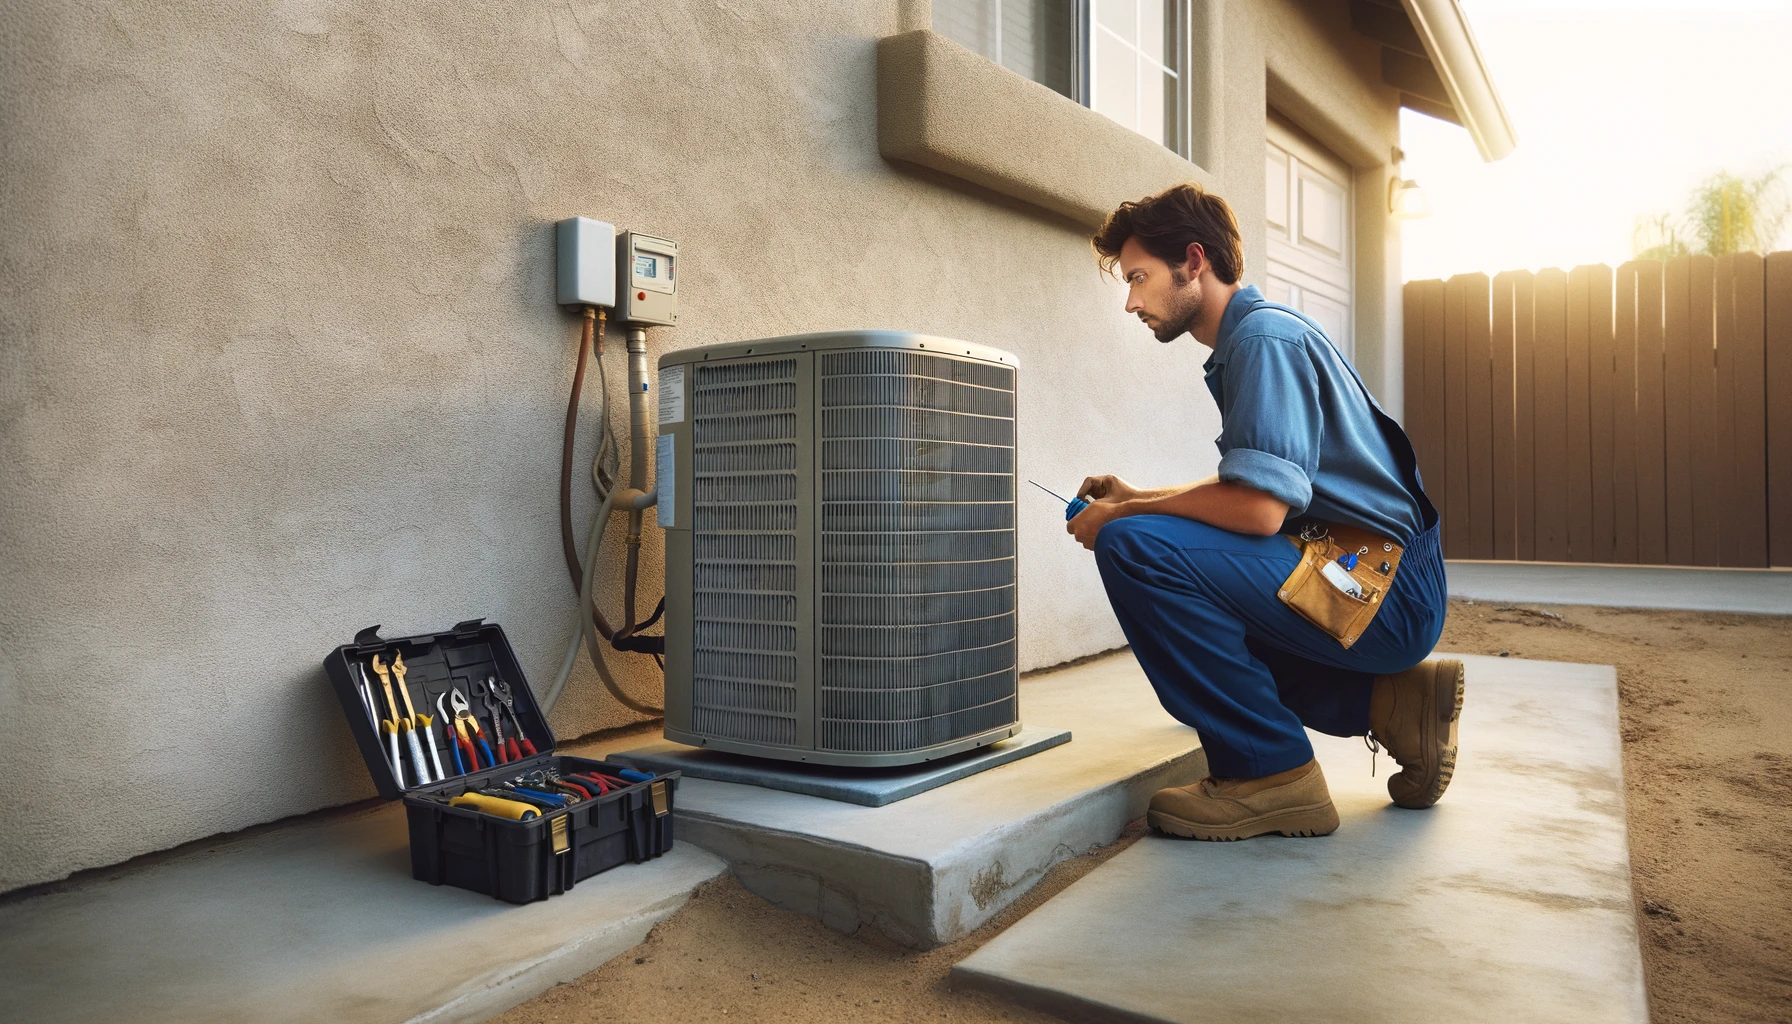 Service technician repairing and maintaining the HVAC system